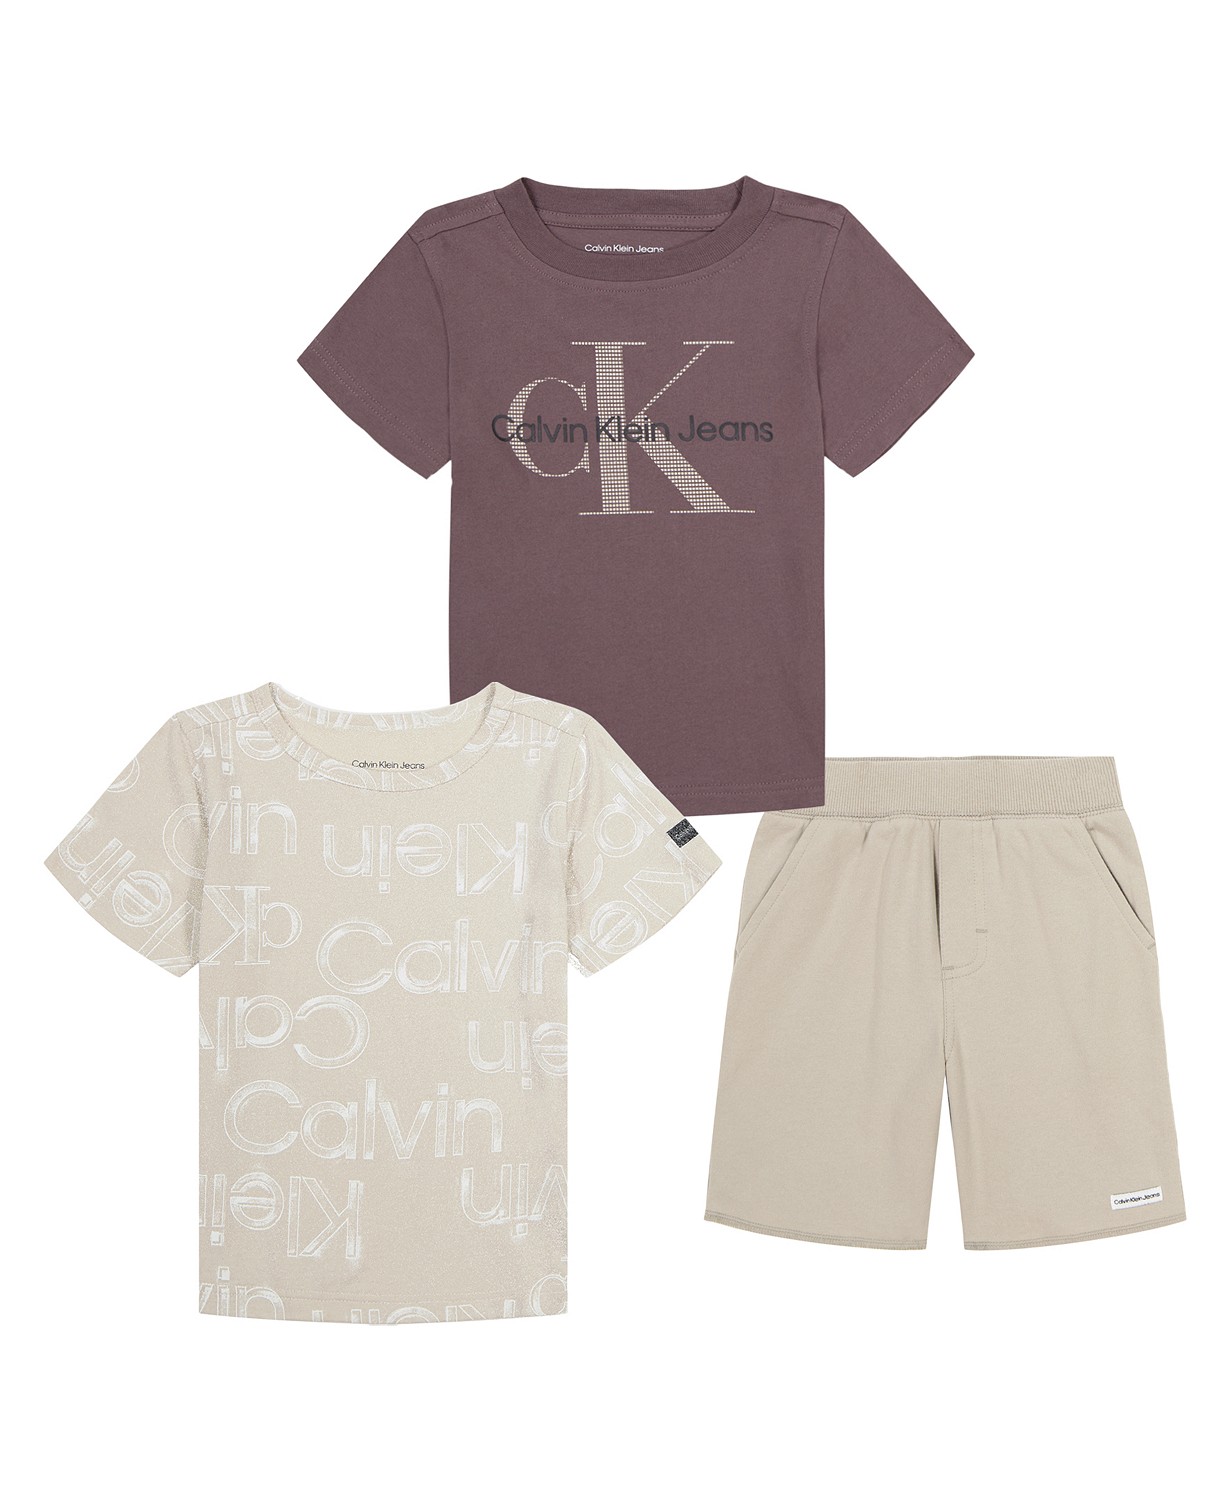 Little Boys Set- 2 Logo T-shirts and French Terry Shorts 3 piece set